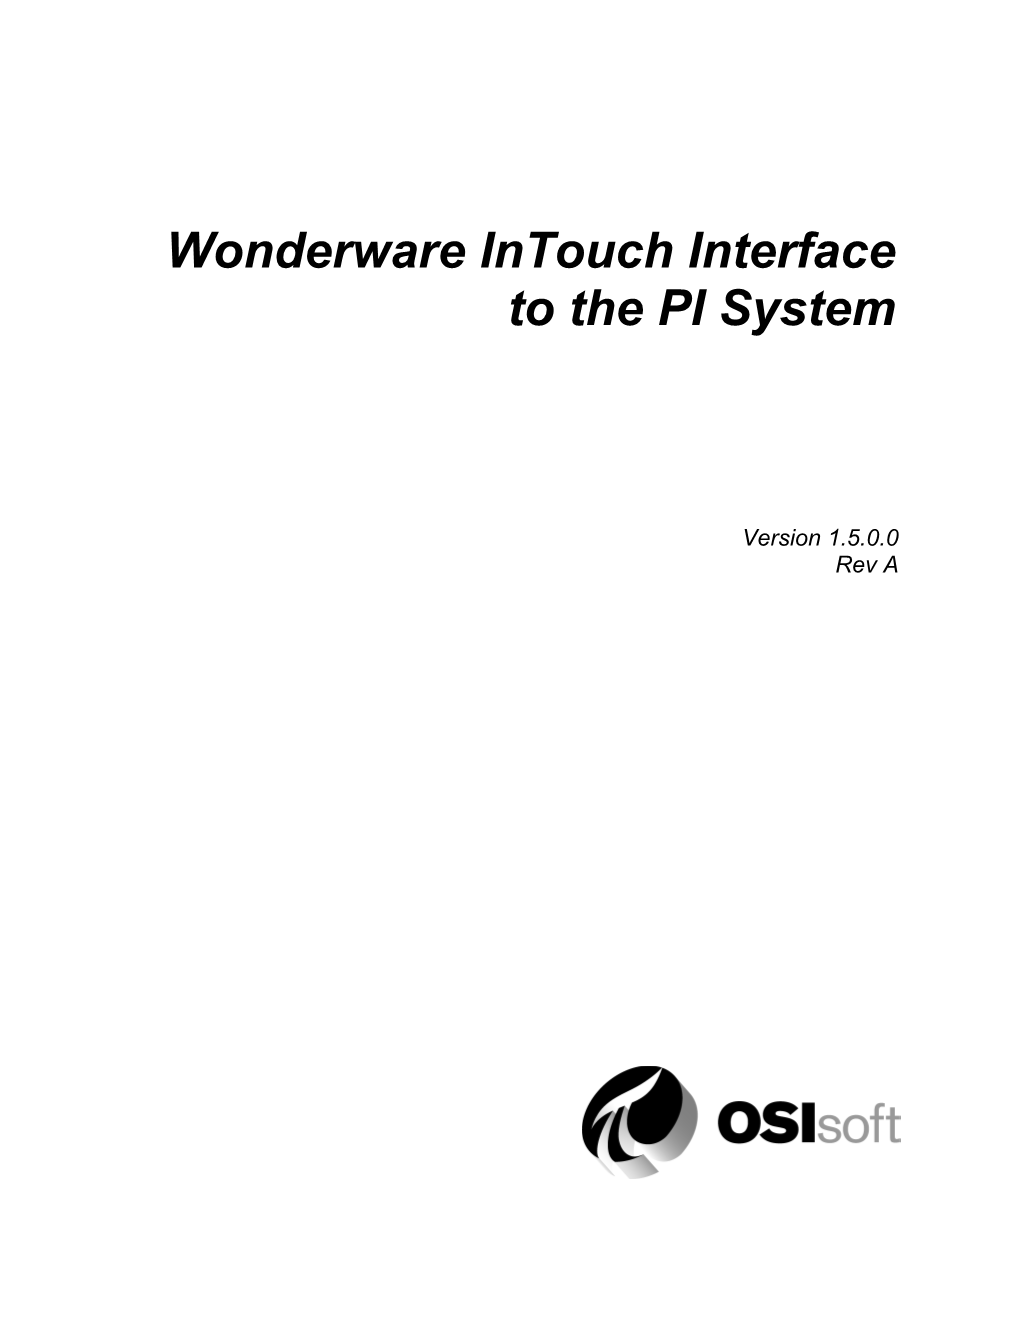 Wonderware Intouch Interface to the PI System